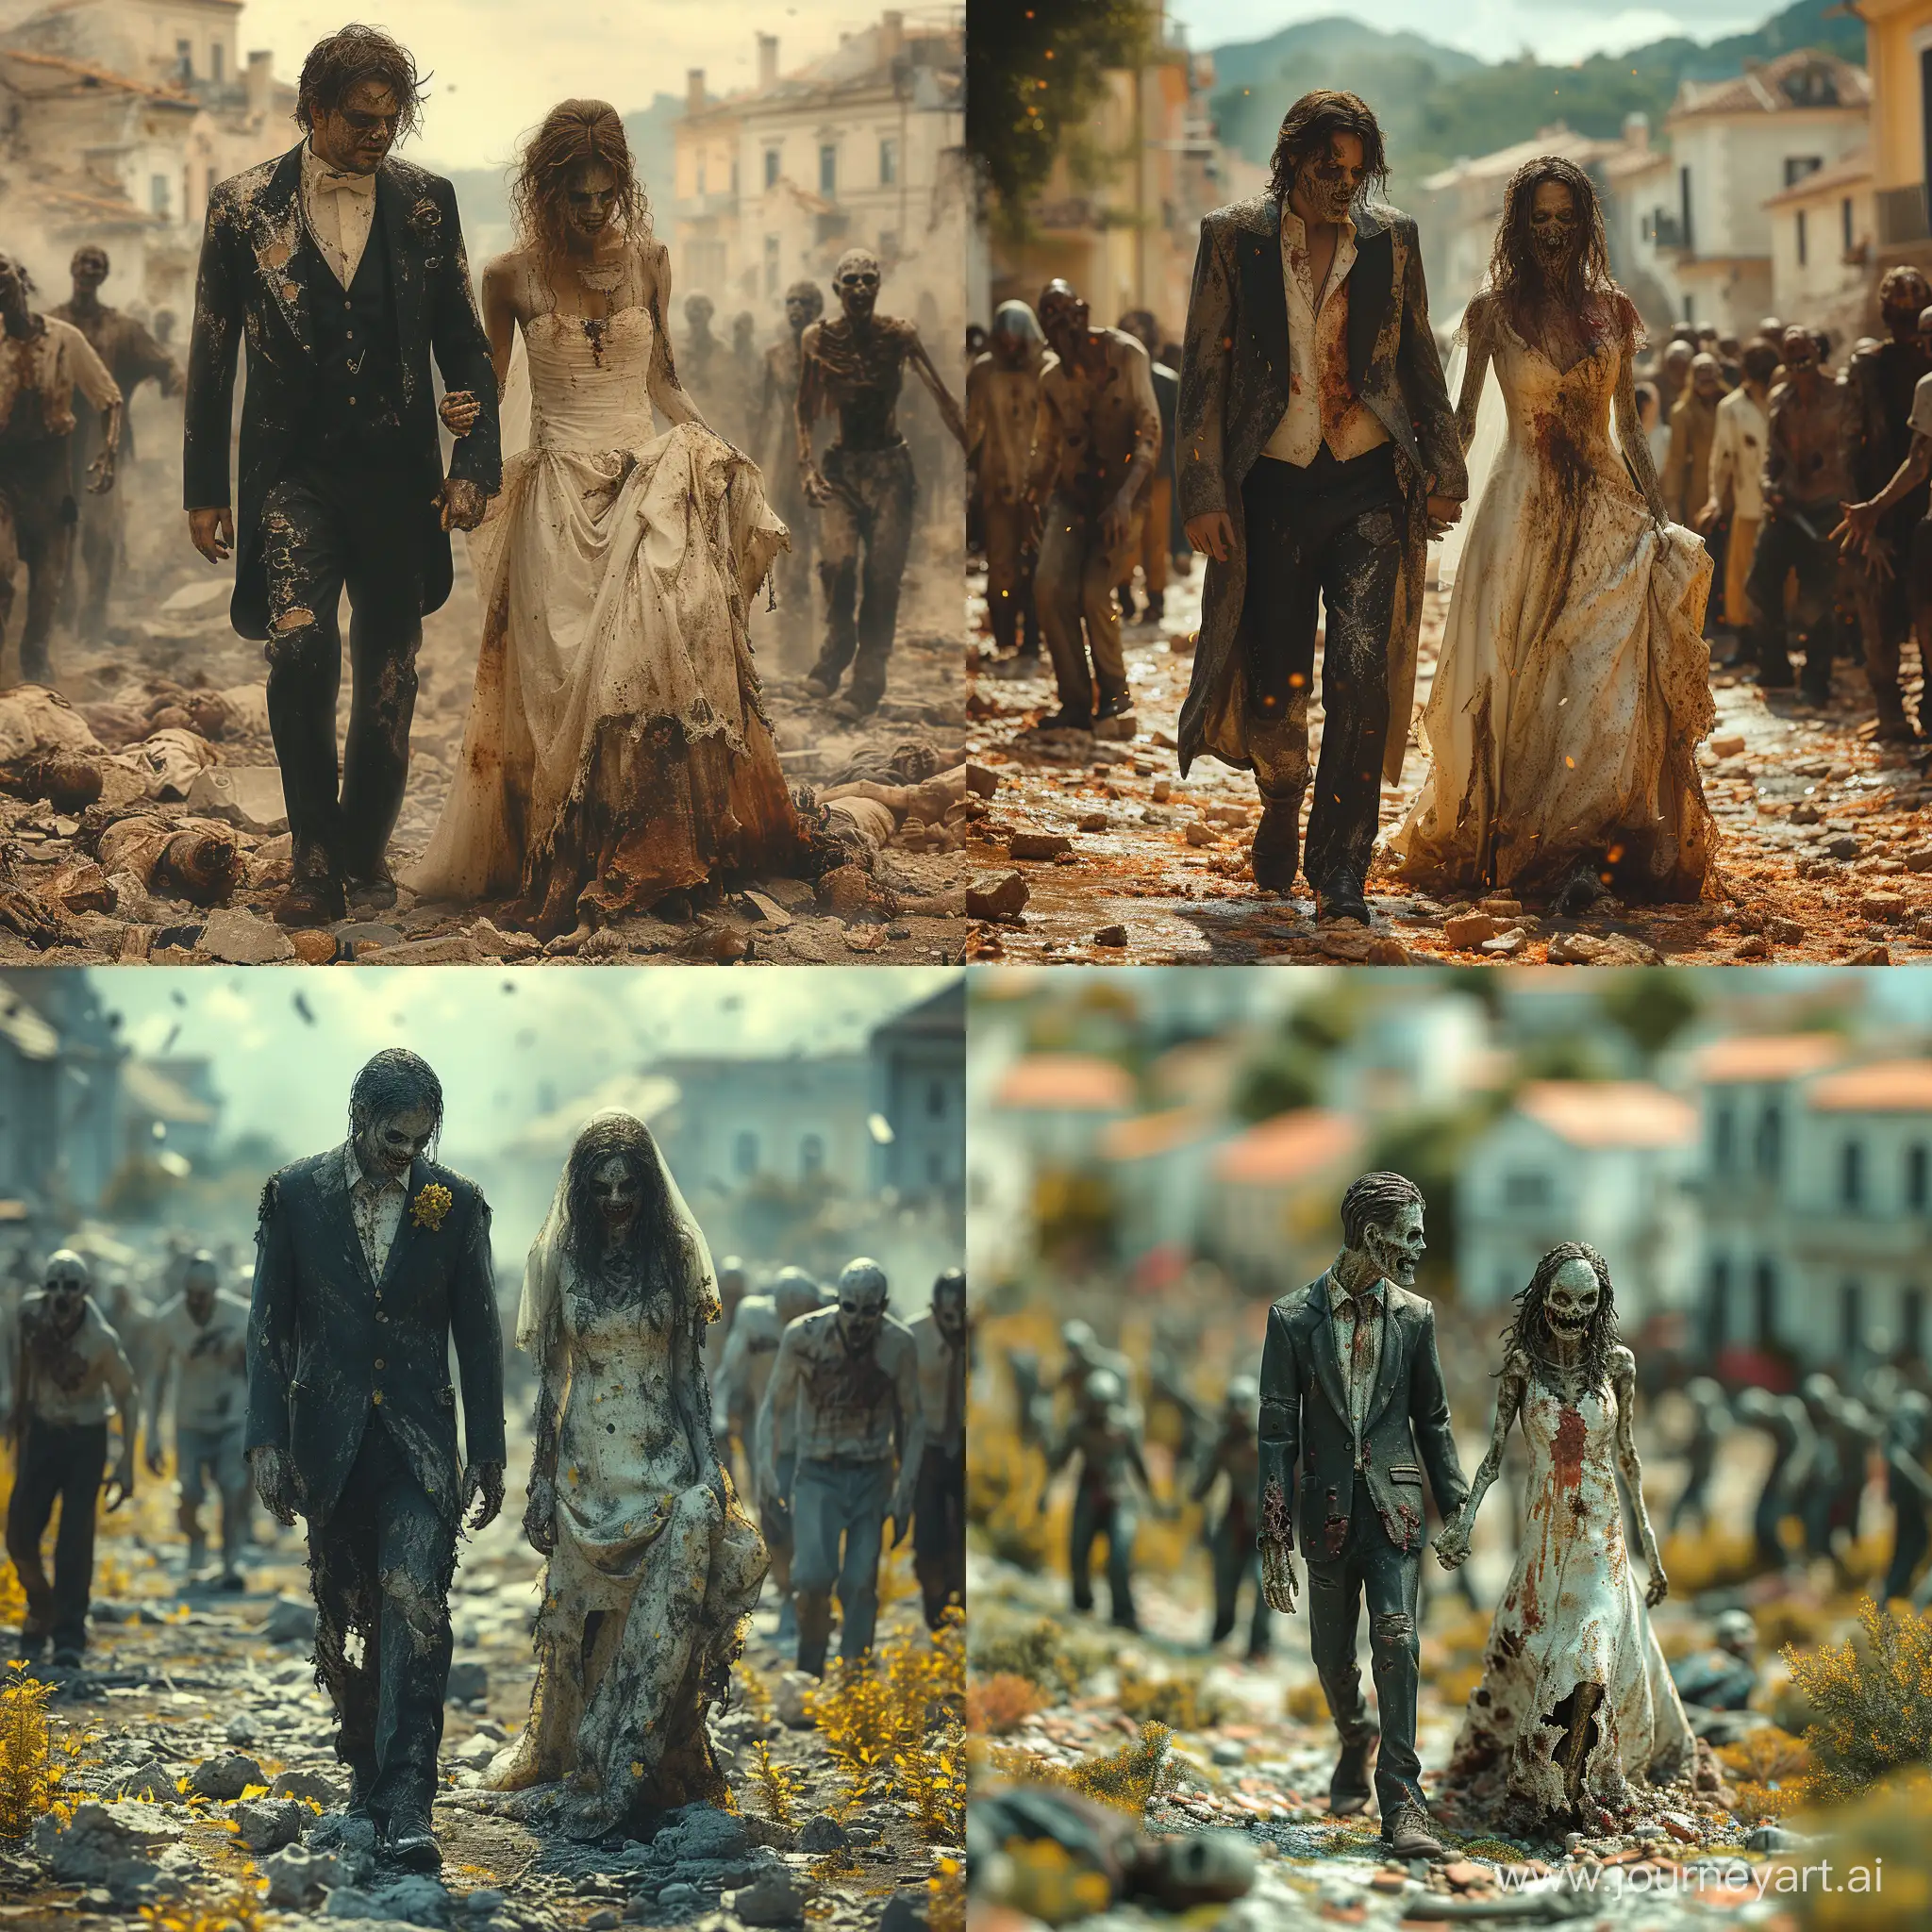 Eerie-Zombie-Wedding-Amidst-Chaos-in-Old-Town